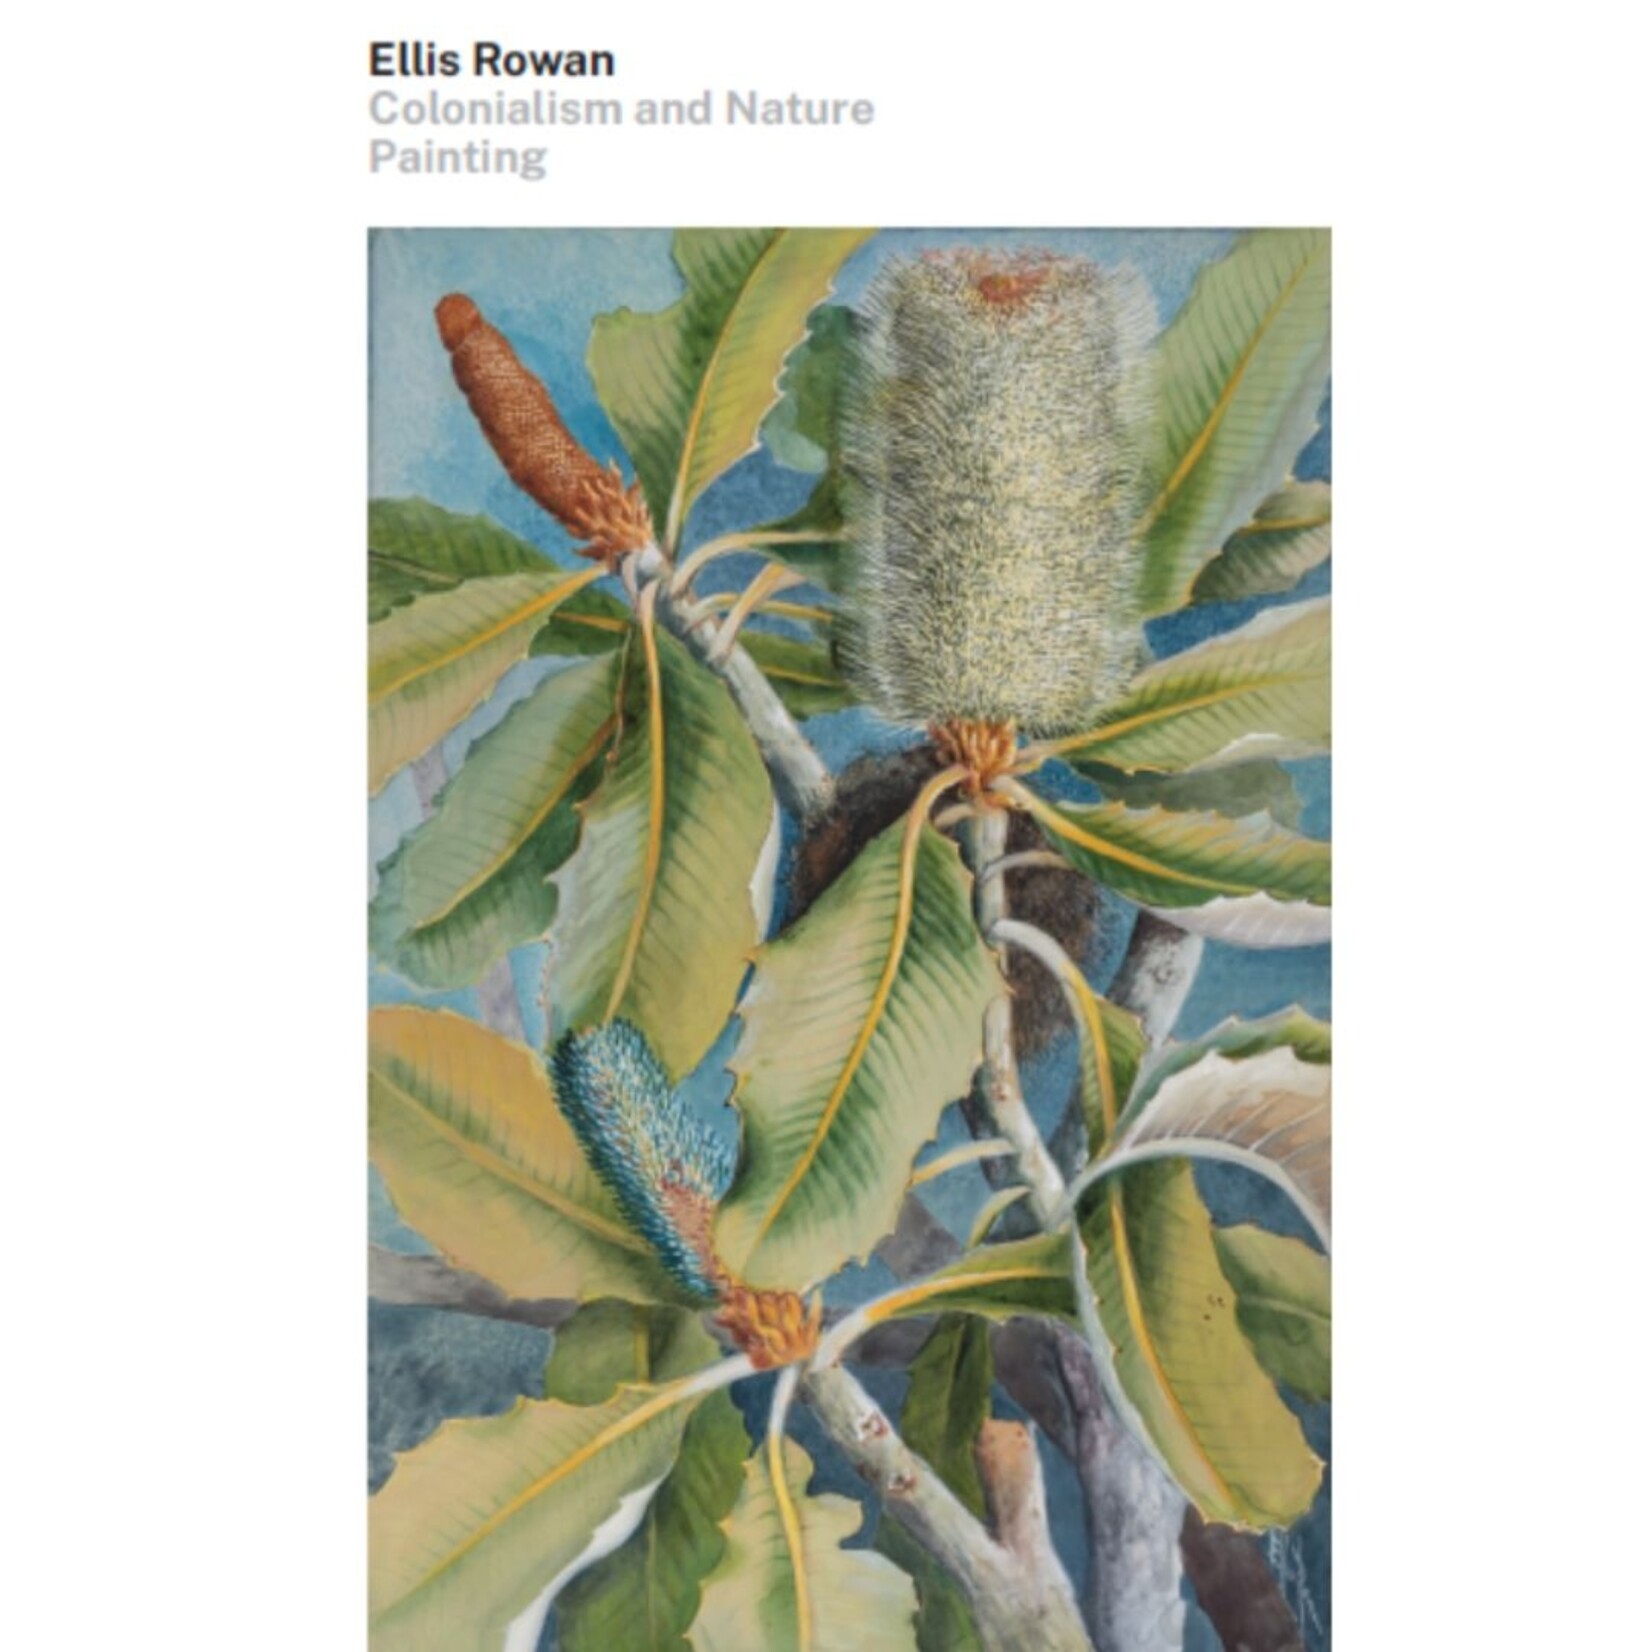 Ellis Rowan, Colonialism and Nature Painting | Exhibition Catalogue